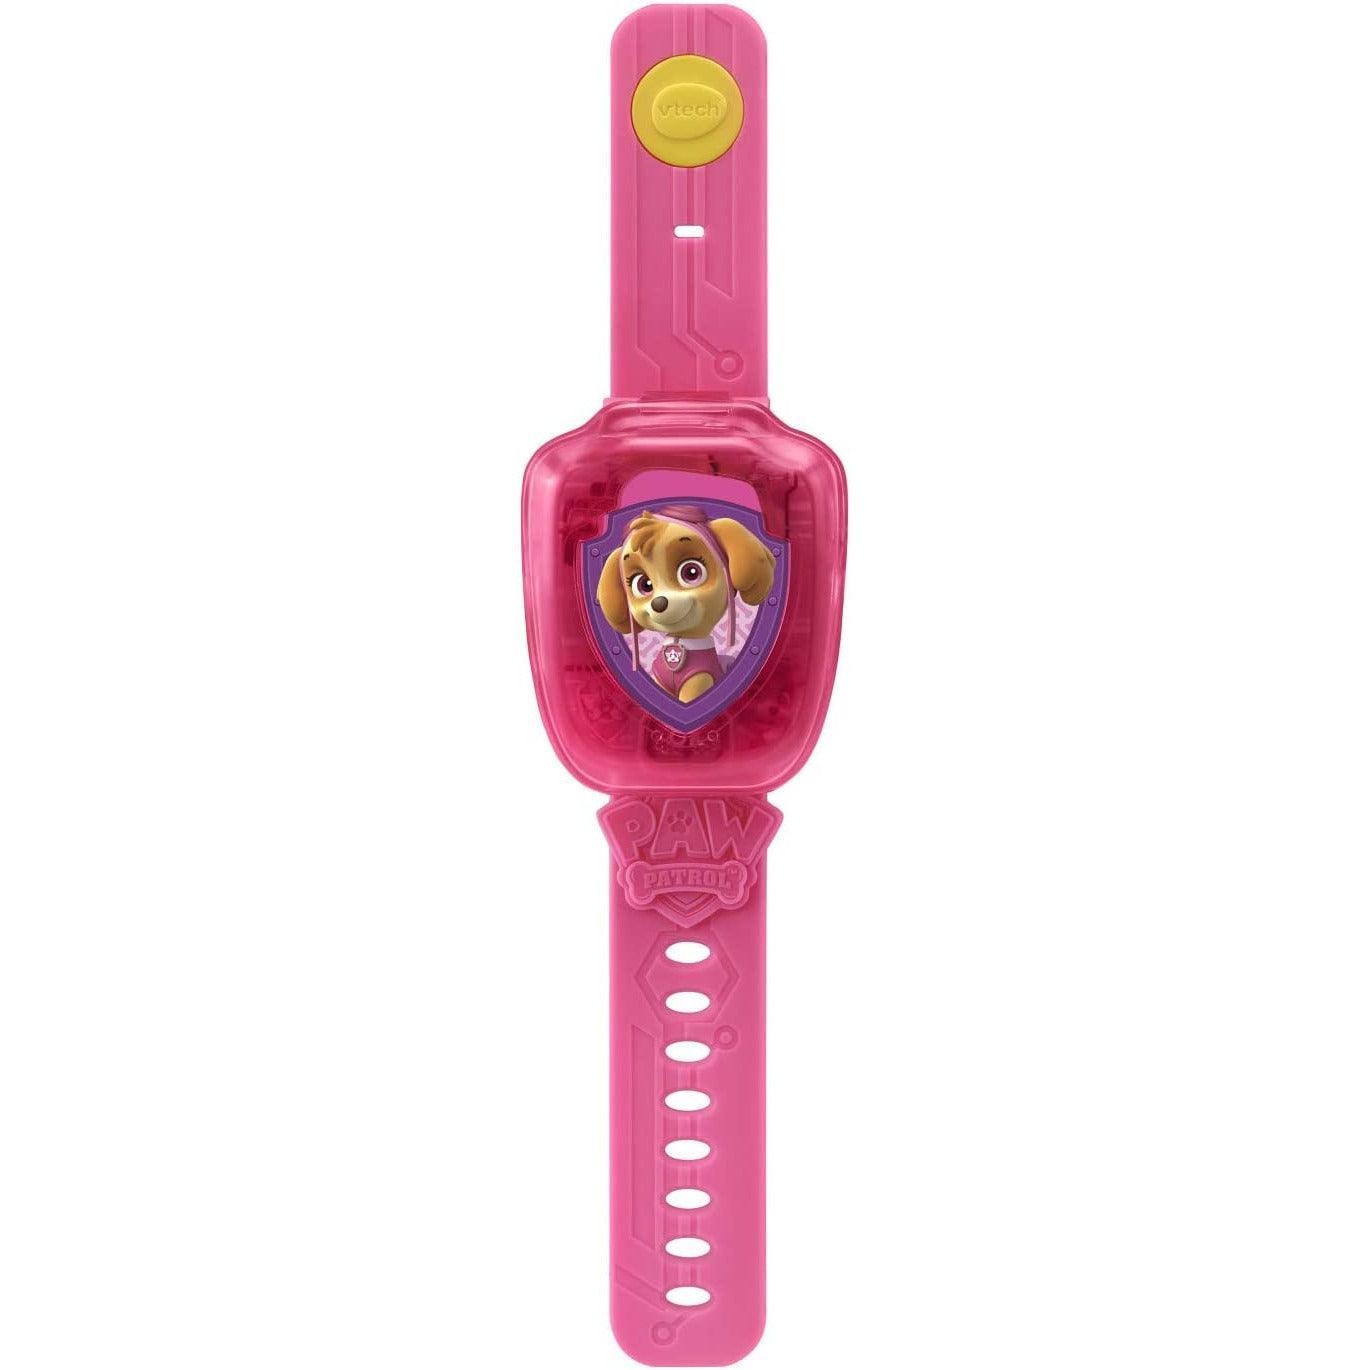 PAW Patrol Chase Learning Watch VTech, Pink - BumbleToys - 5-7 Years, Girls, Kids, Paw Patrol, Pre-Order, Watch